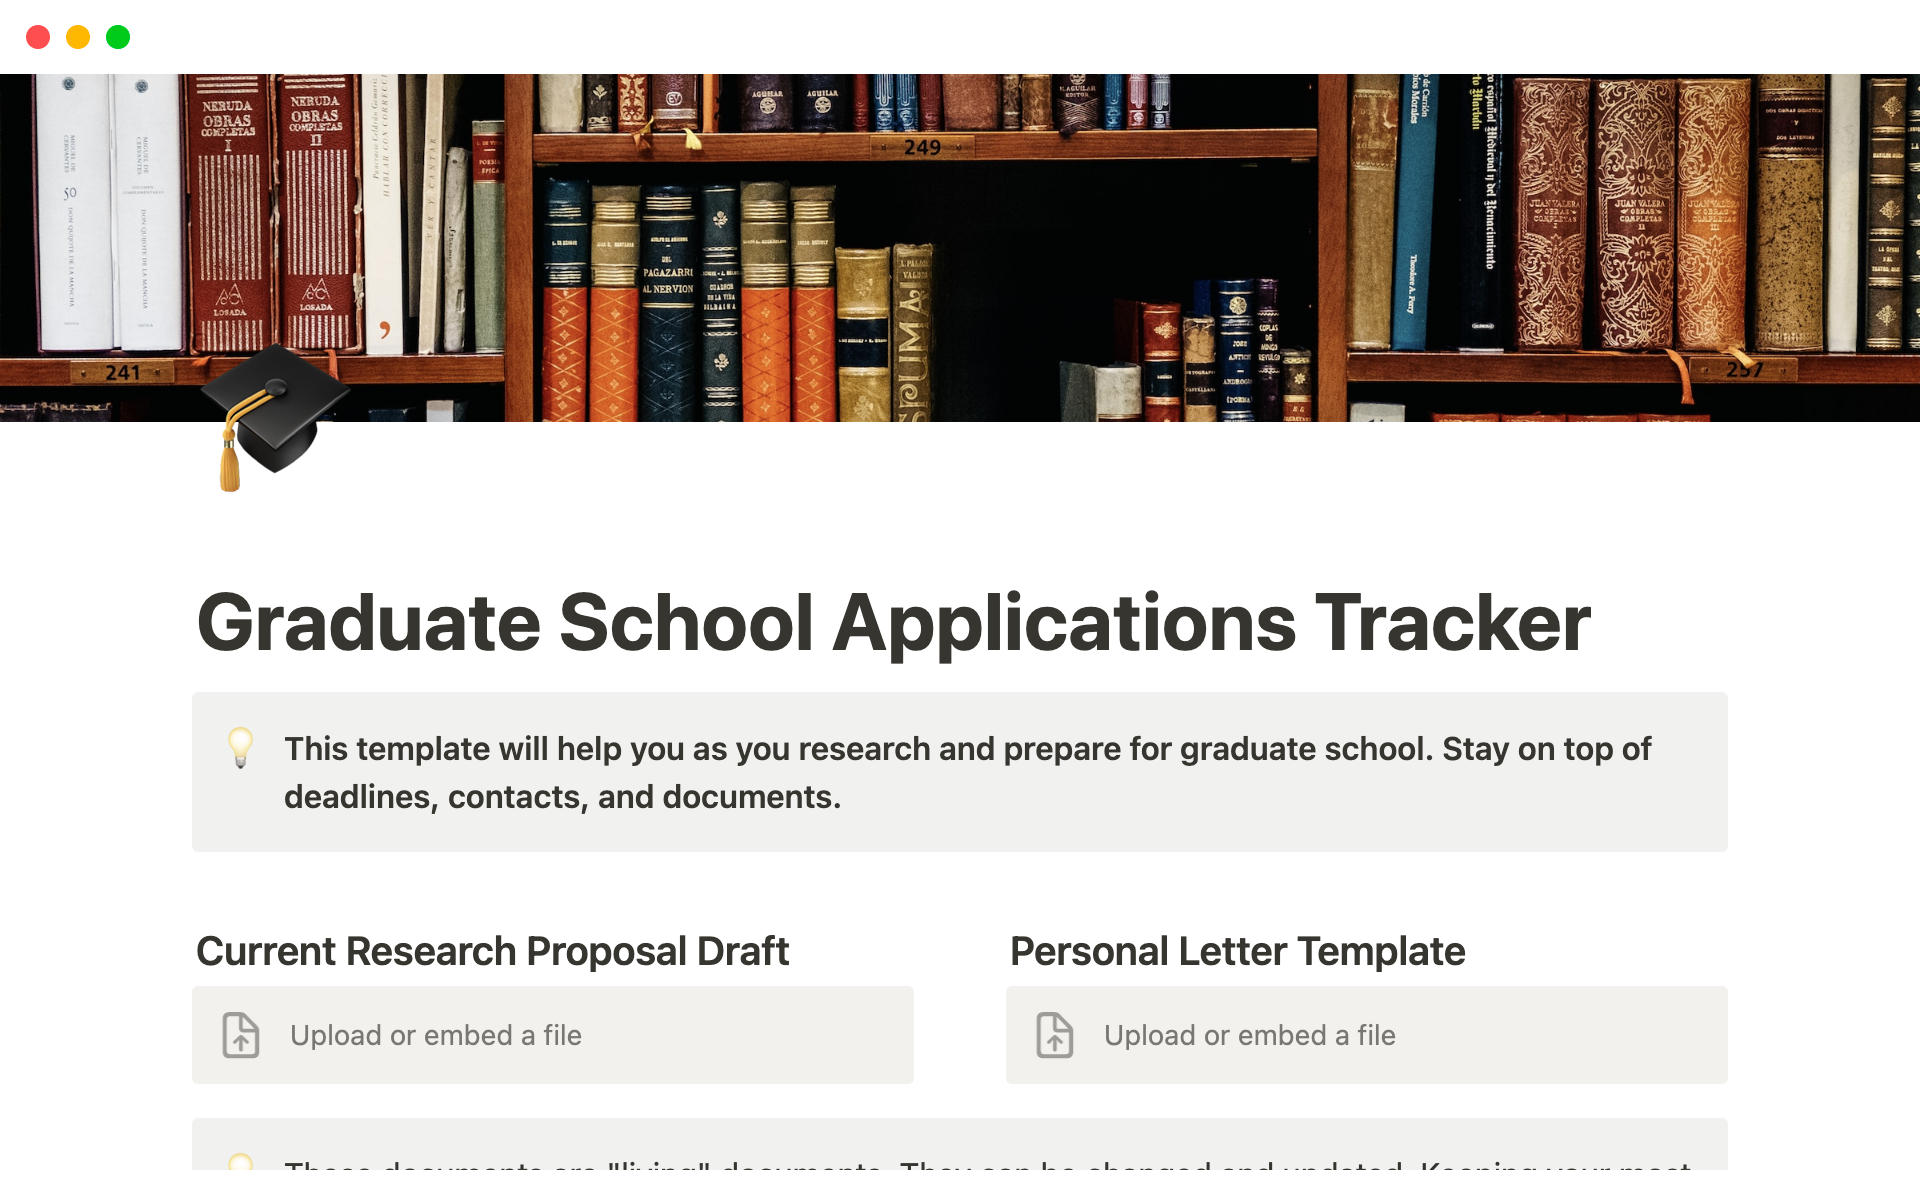 Helps you keep track of your grad school application process.